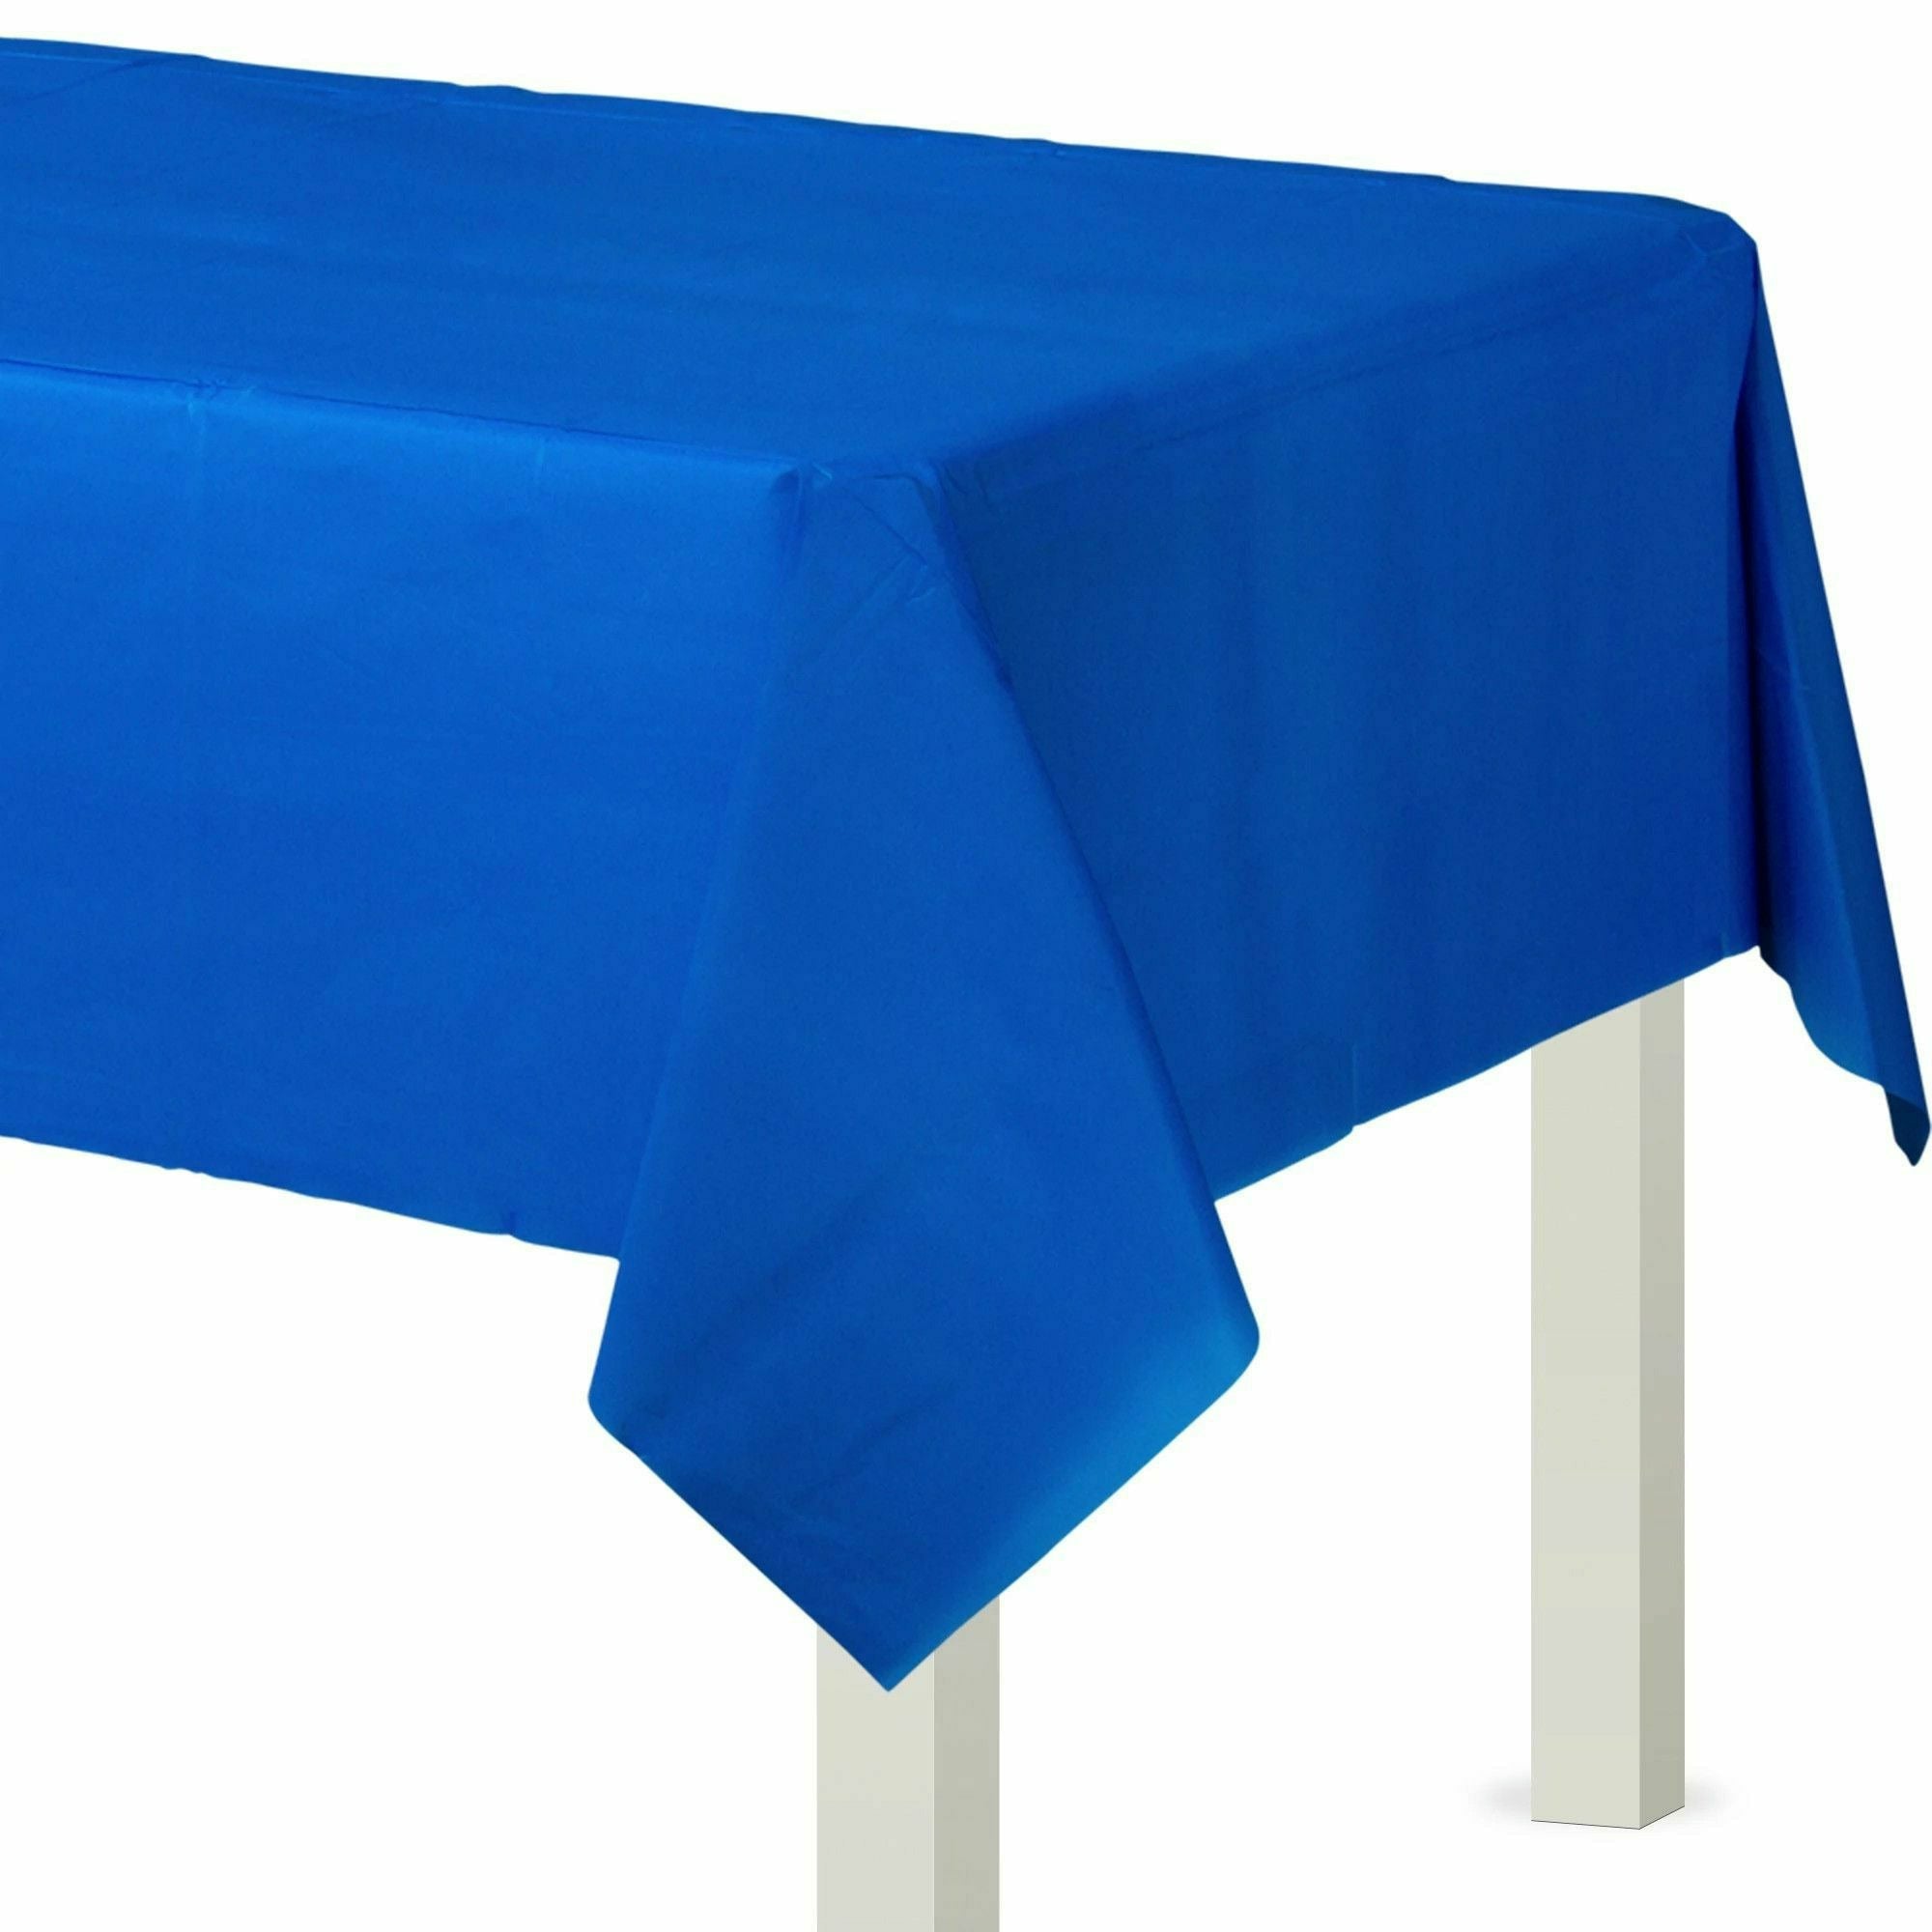 Amscan BASIC Bright Royal Blue - Flannel Backed Table Cover